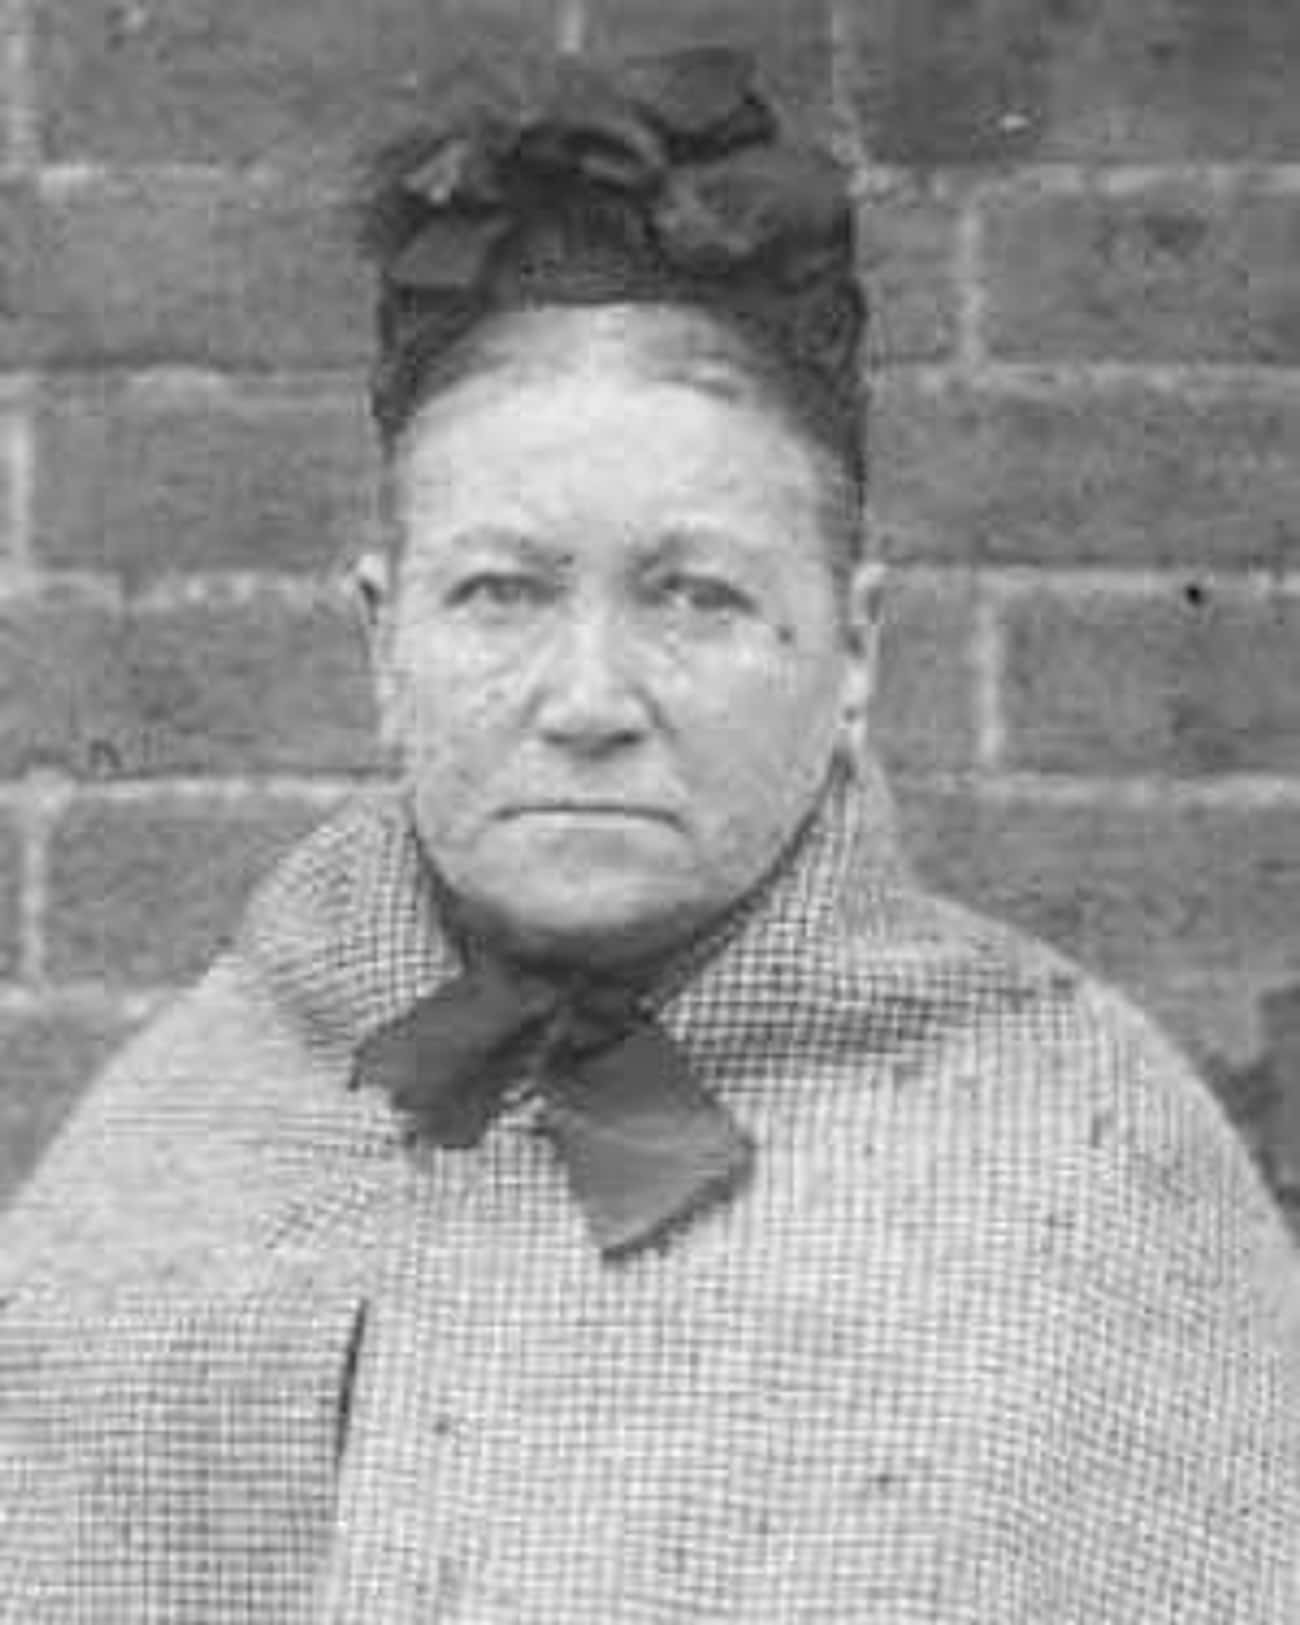 Amelia Dyer Might Have Murdered Up To 400 Babies